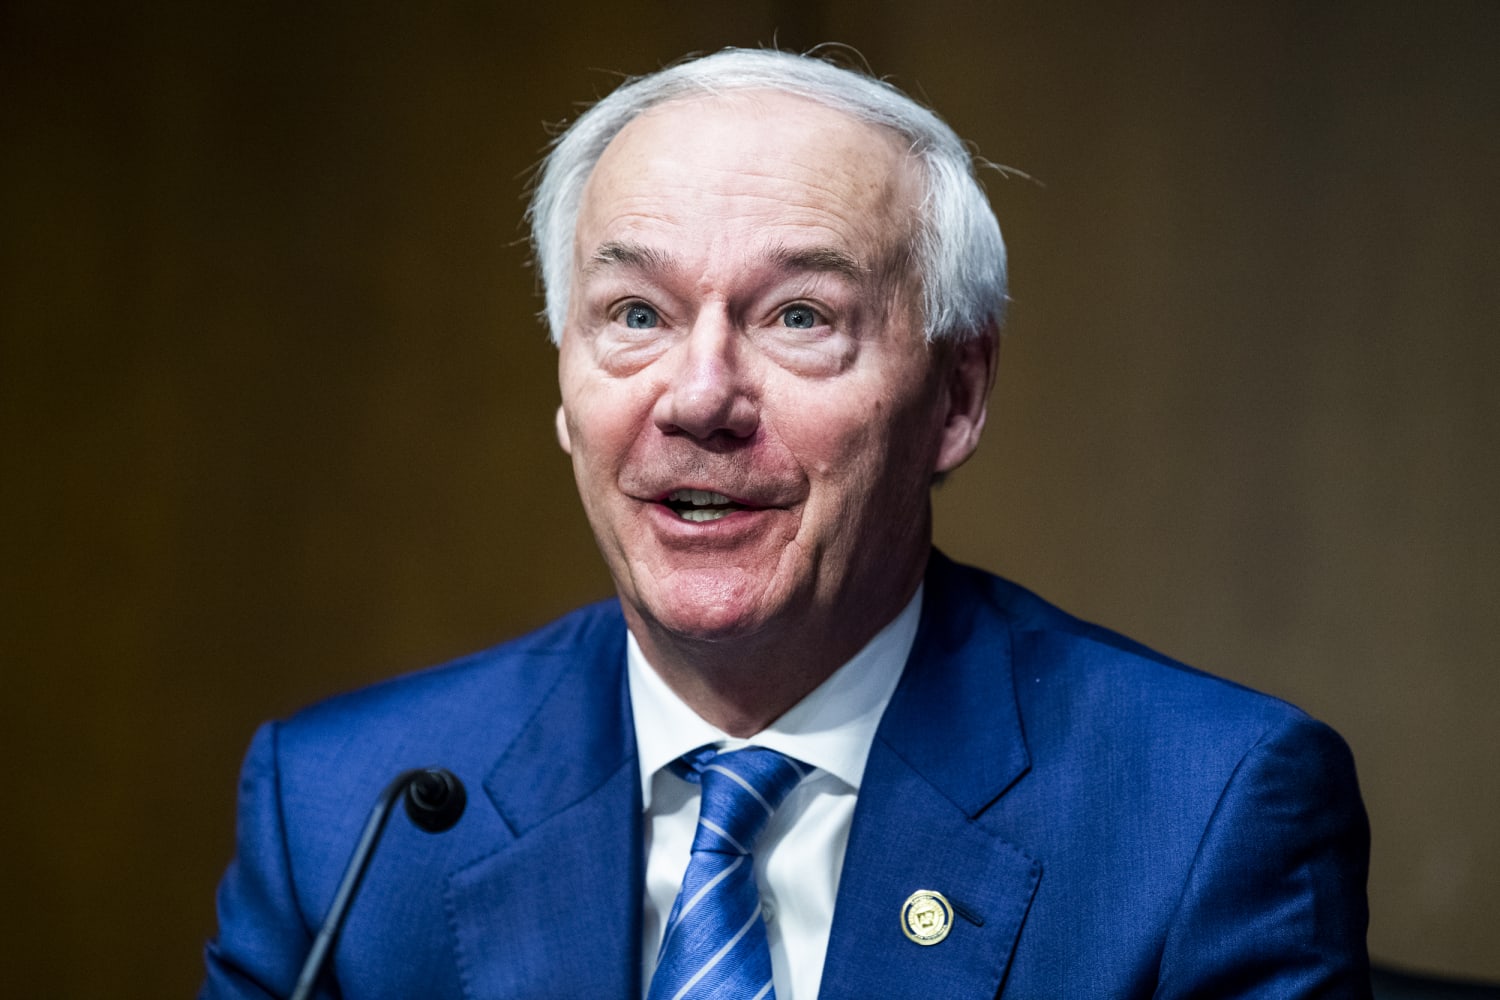 Asa Hutchinson says he’ll decide 2024 run early next year: Trump has ‘accelerated everyone’s time frame’